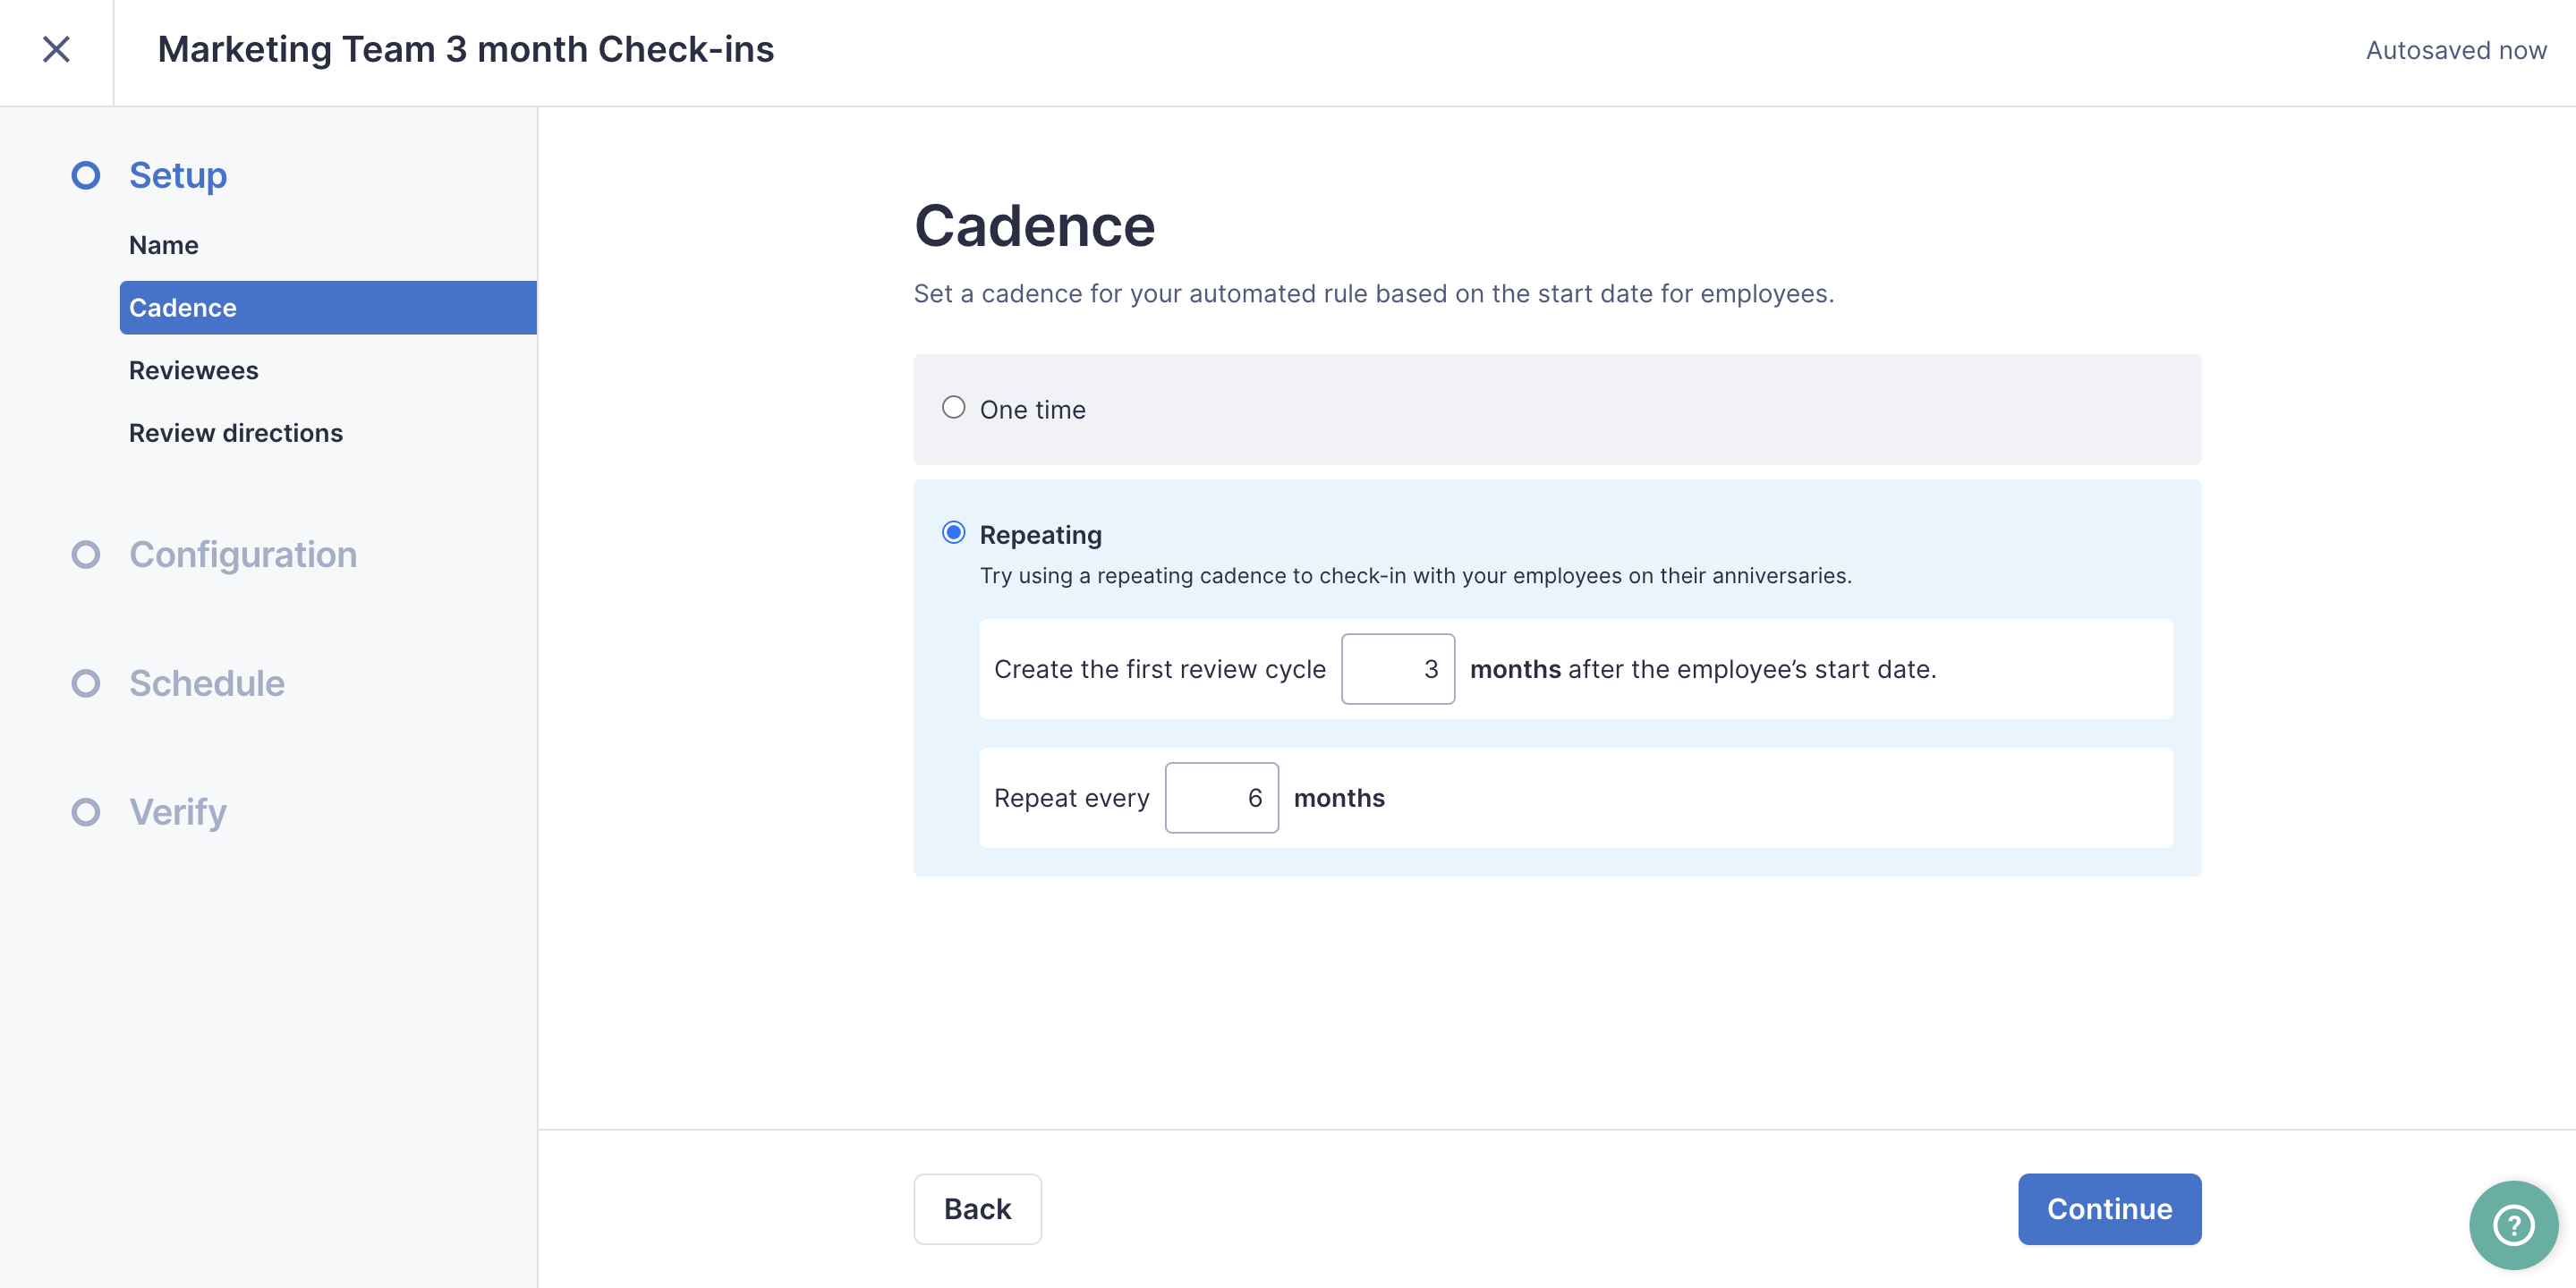 Image of the Automated Rules settings within the Cadence page with the Recurring option selected